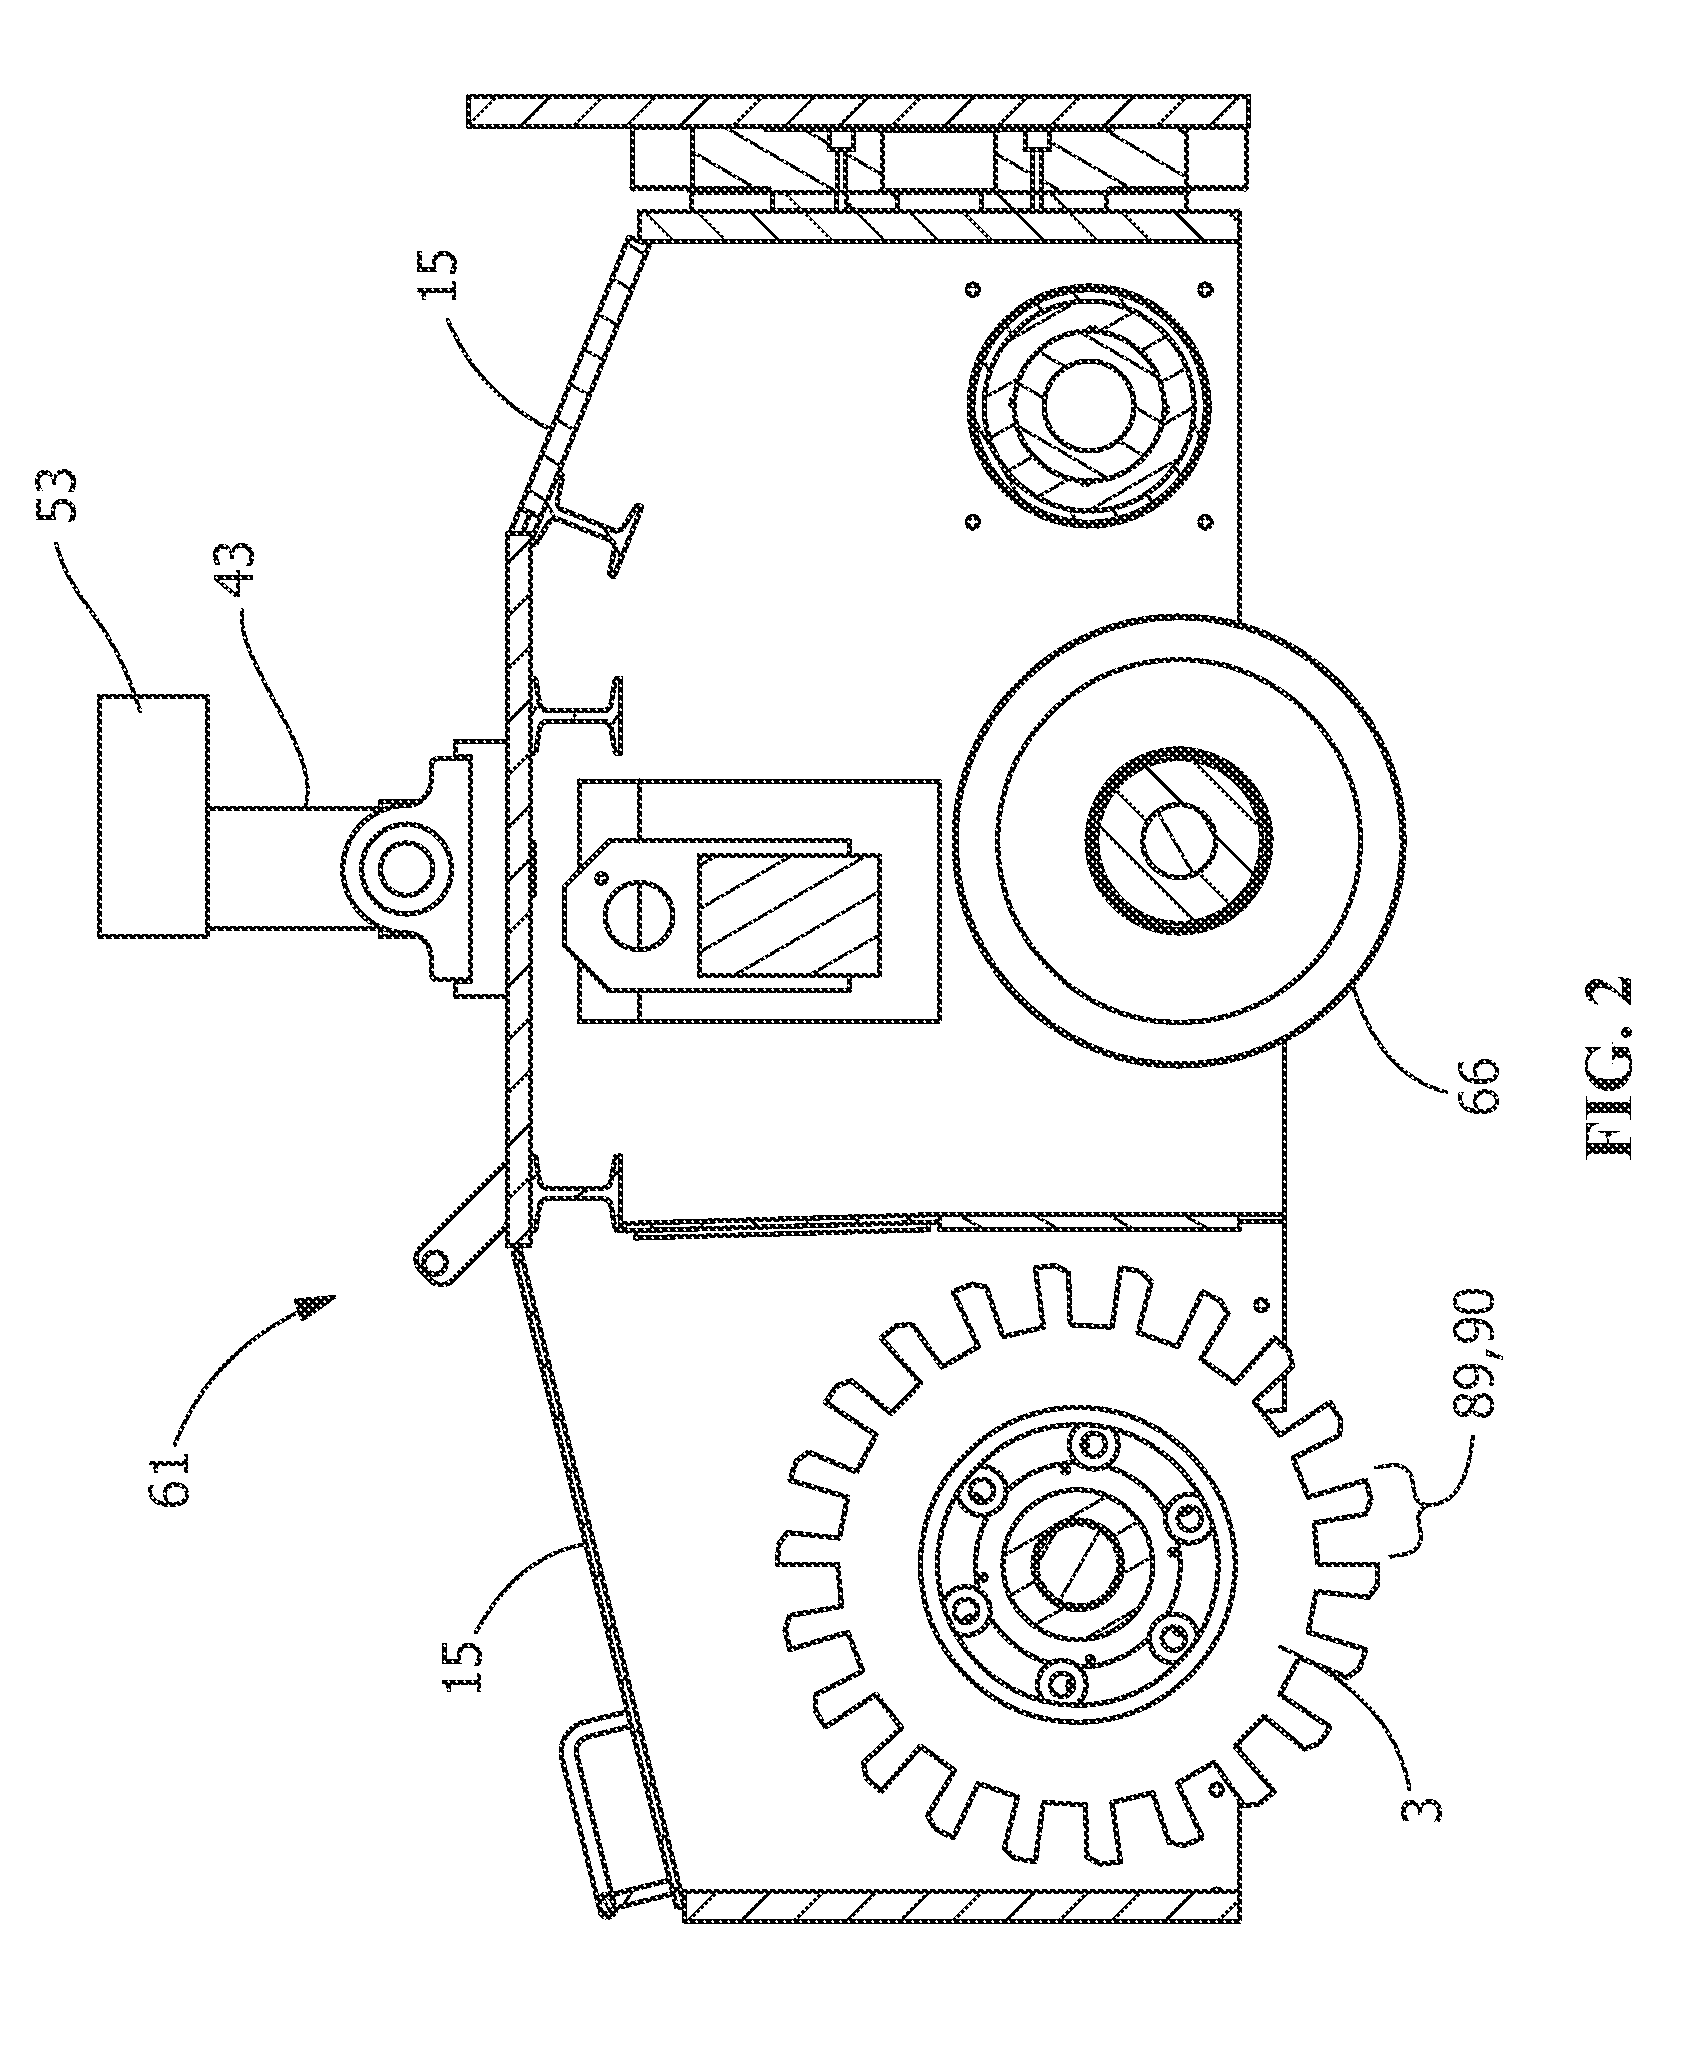 Cutting tool, mounting bracket, and rotatable cutting head